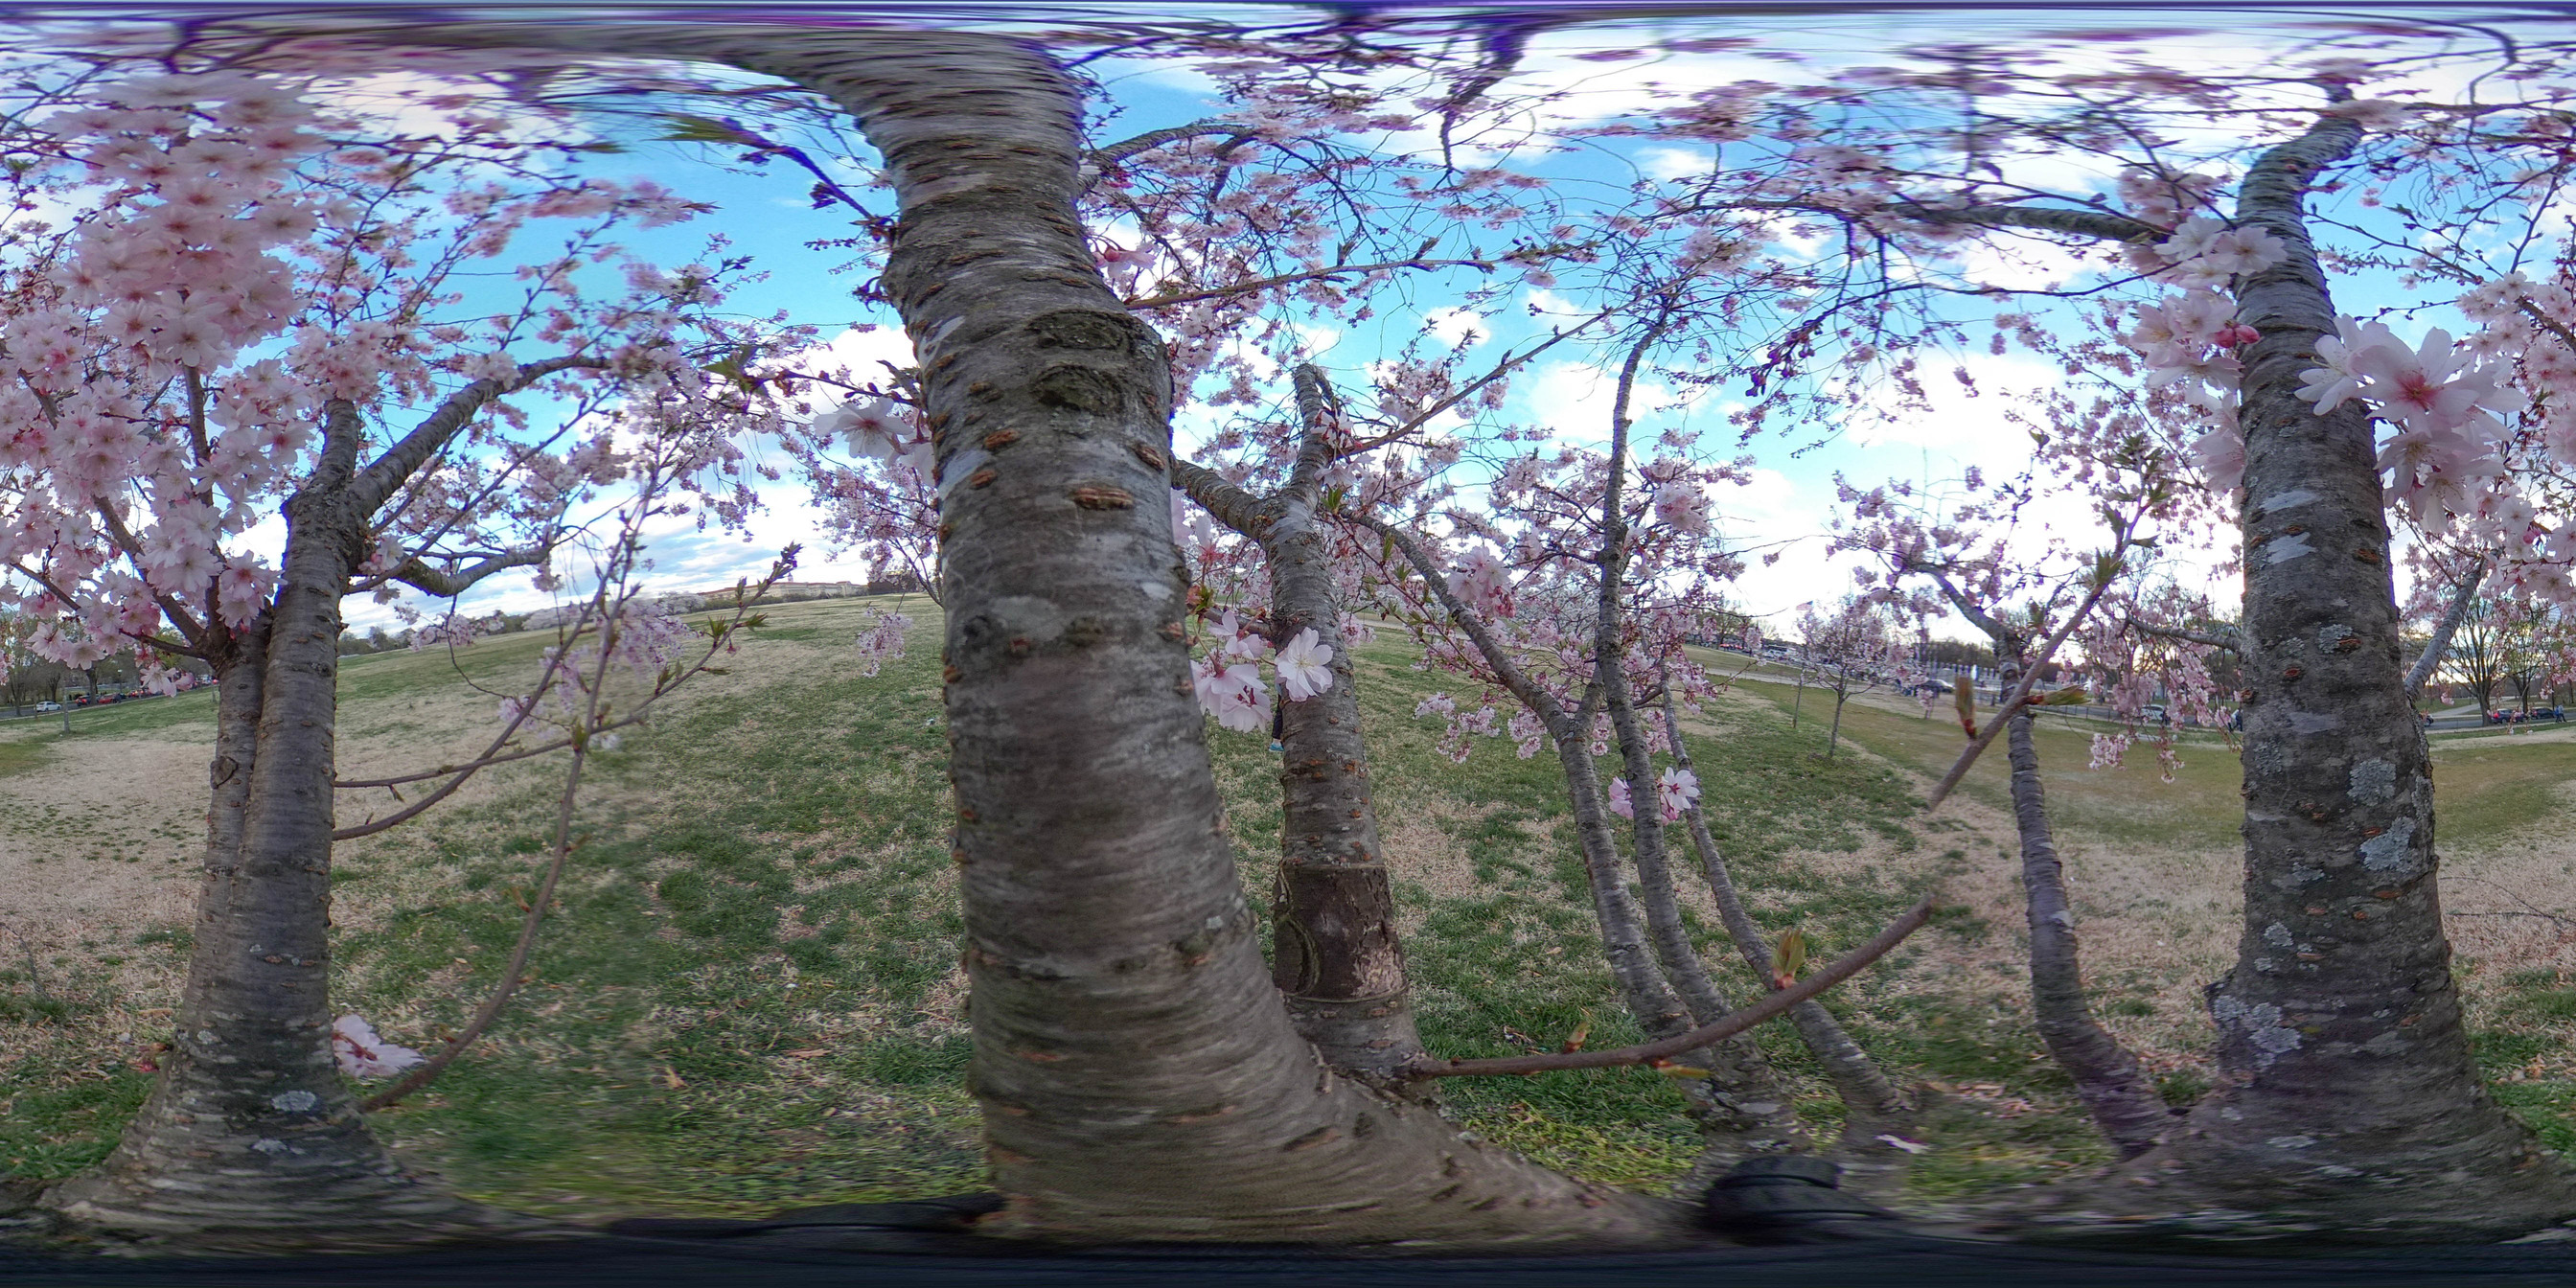 Spherical image inside of a grove of cherry blossom trees in full bloom  with pink blossoms